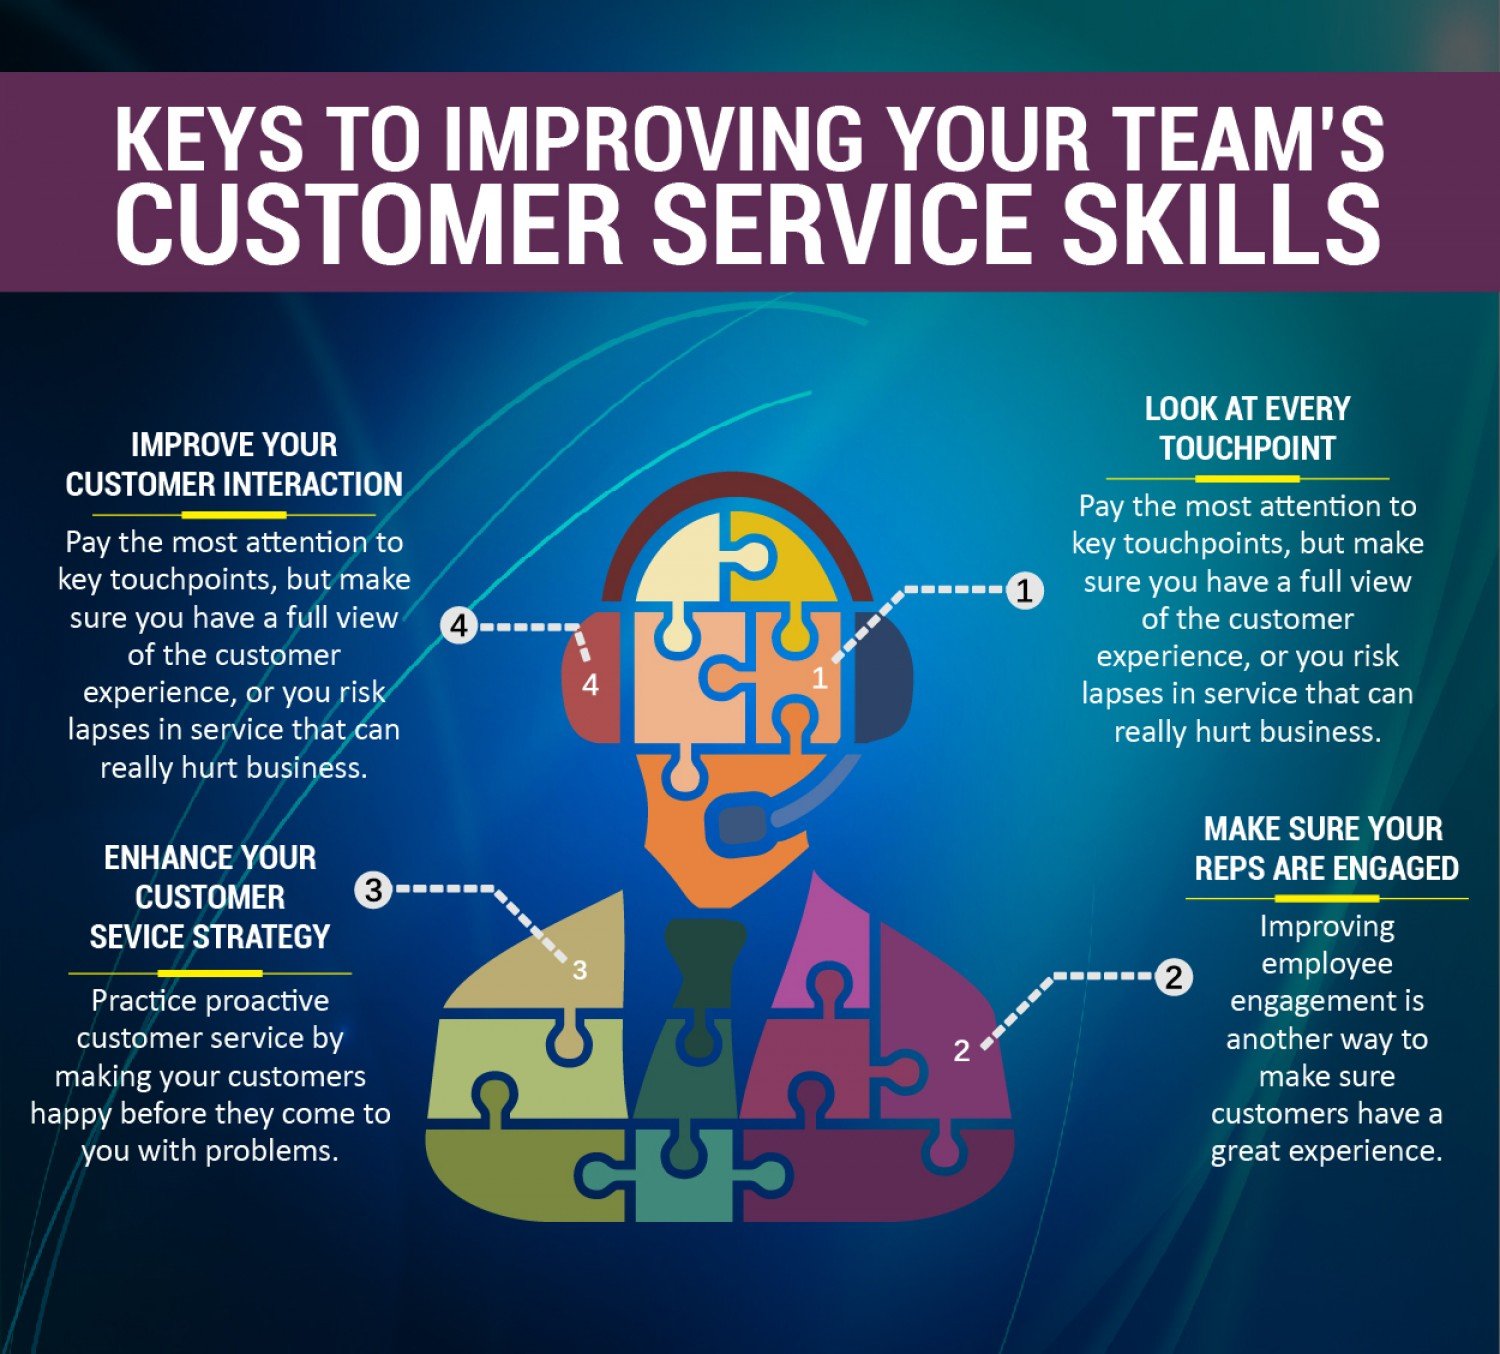 tips to apply for improved customer service skills